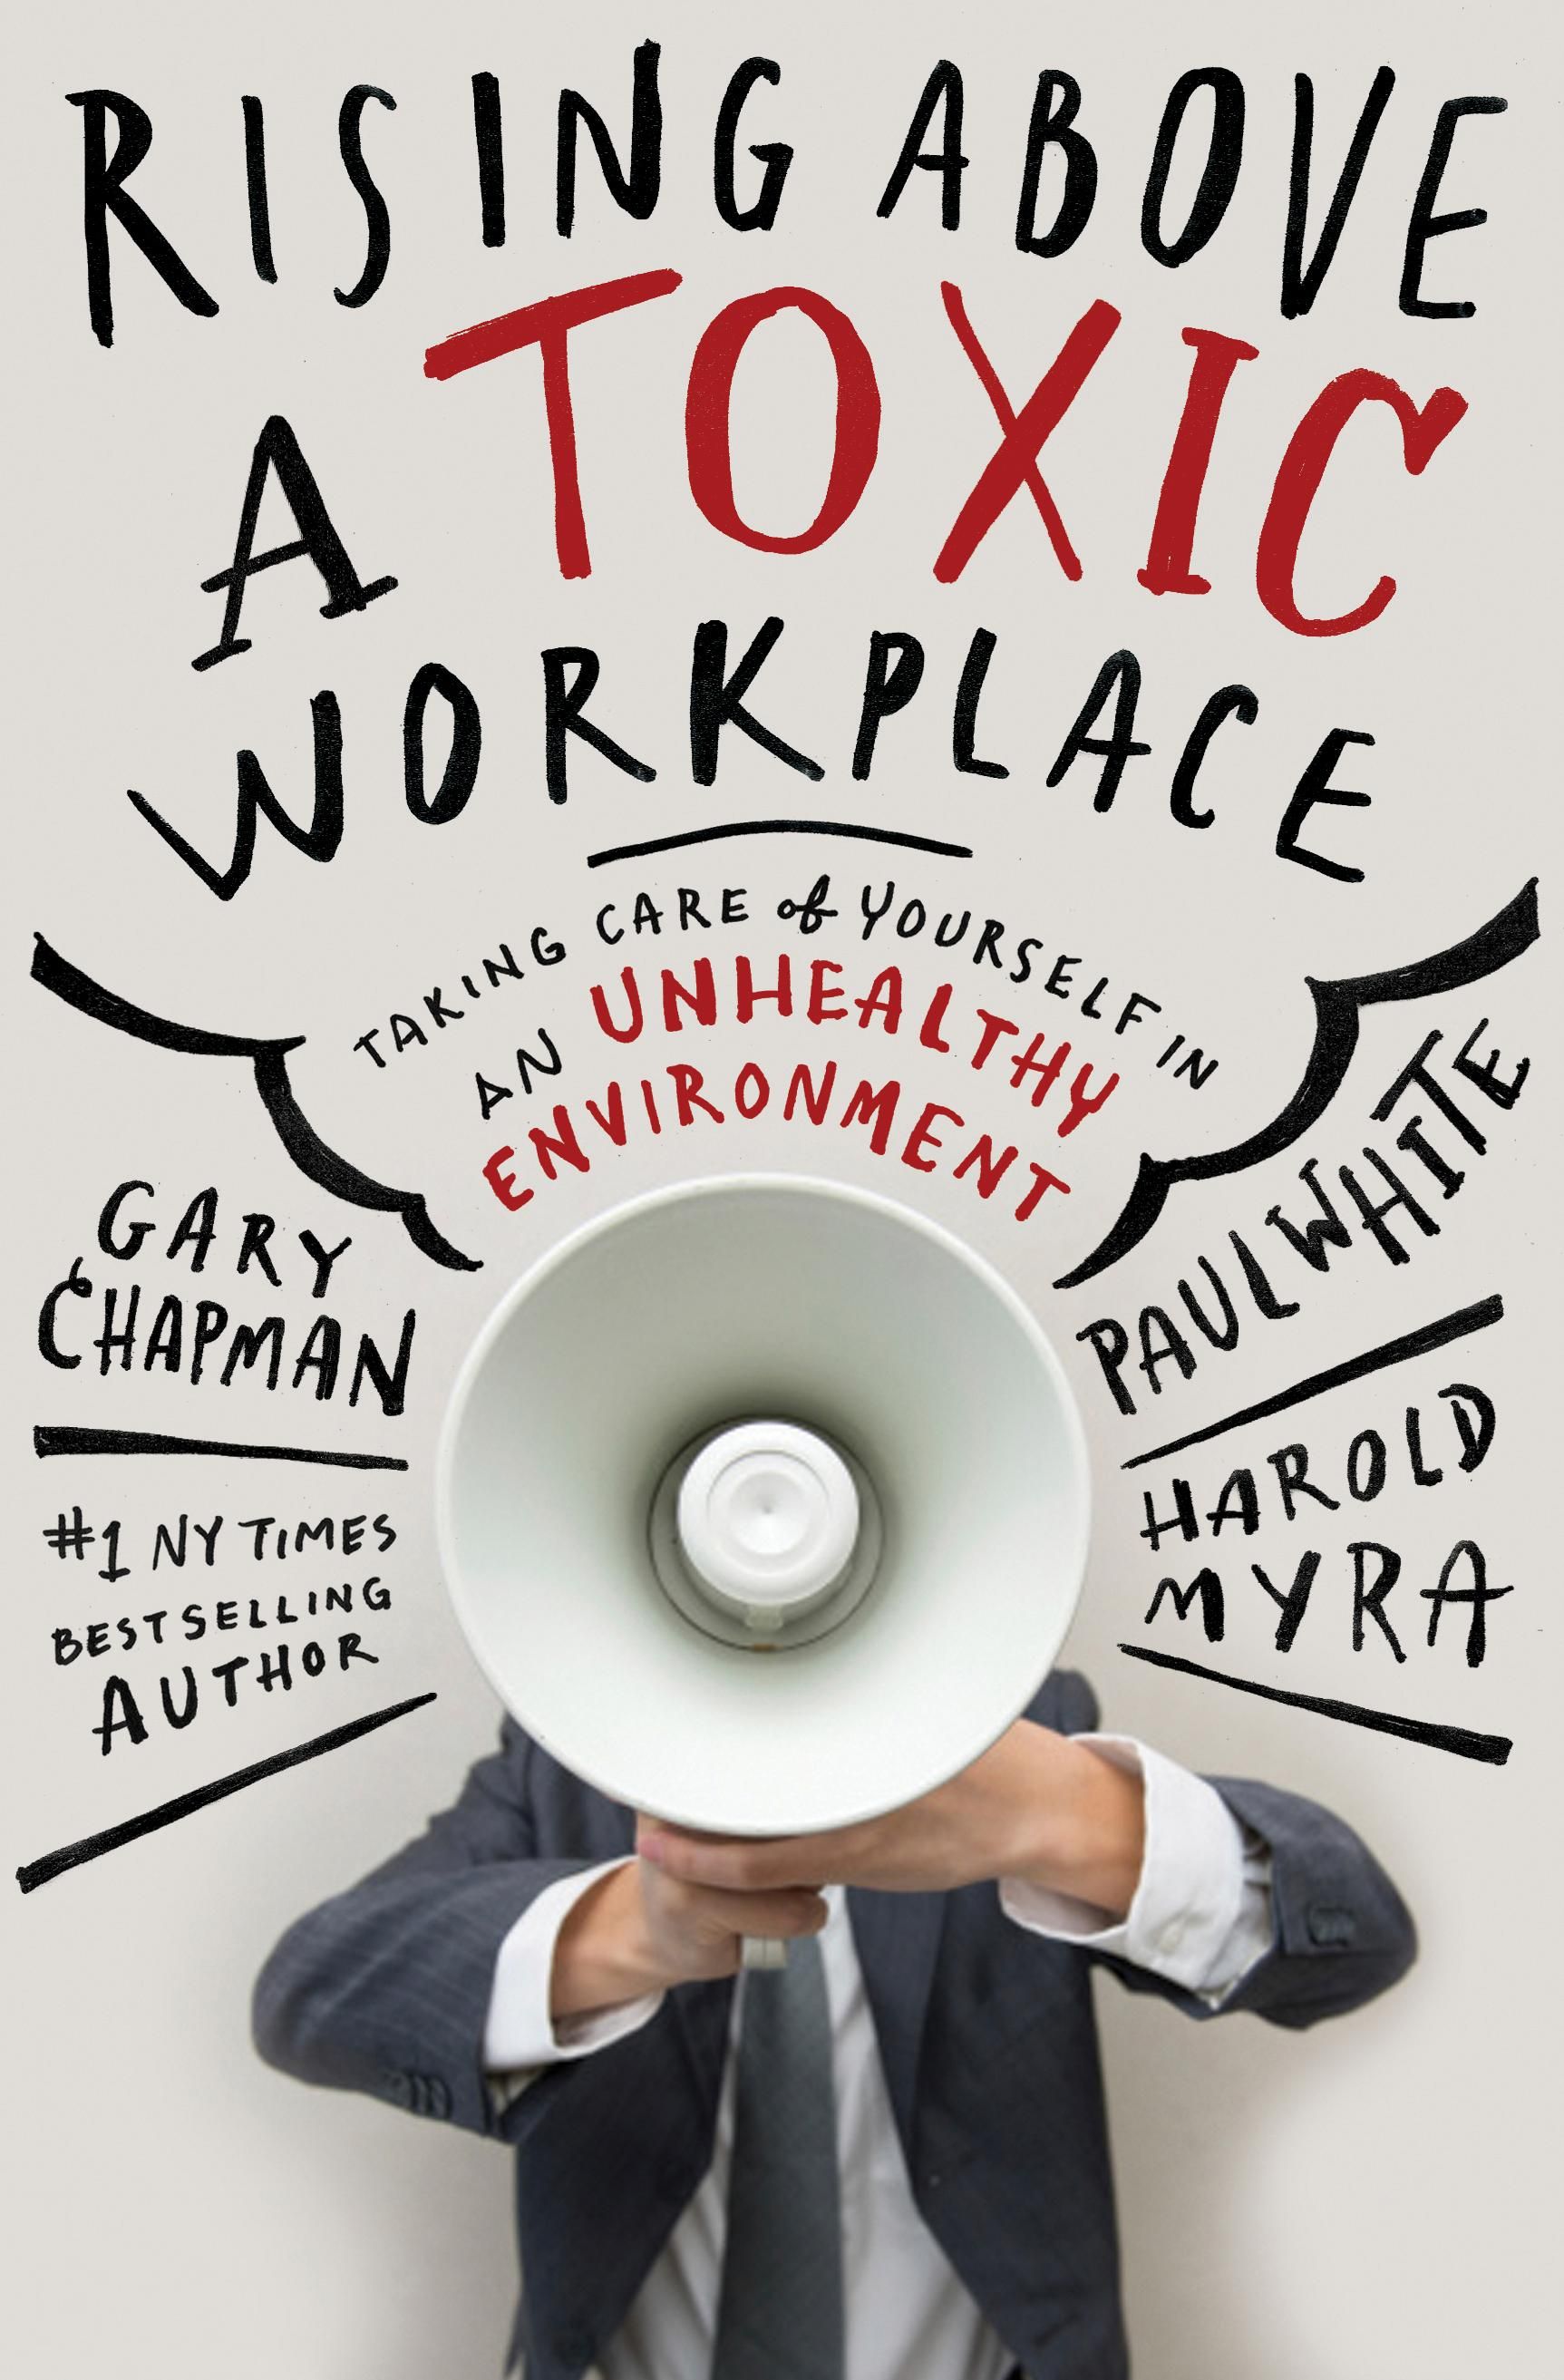 Rising Above a Toxic Workplace